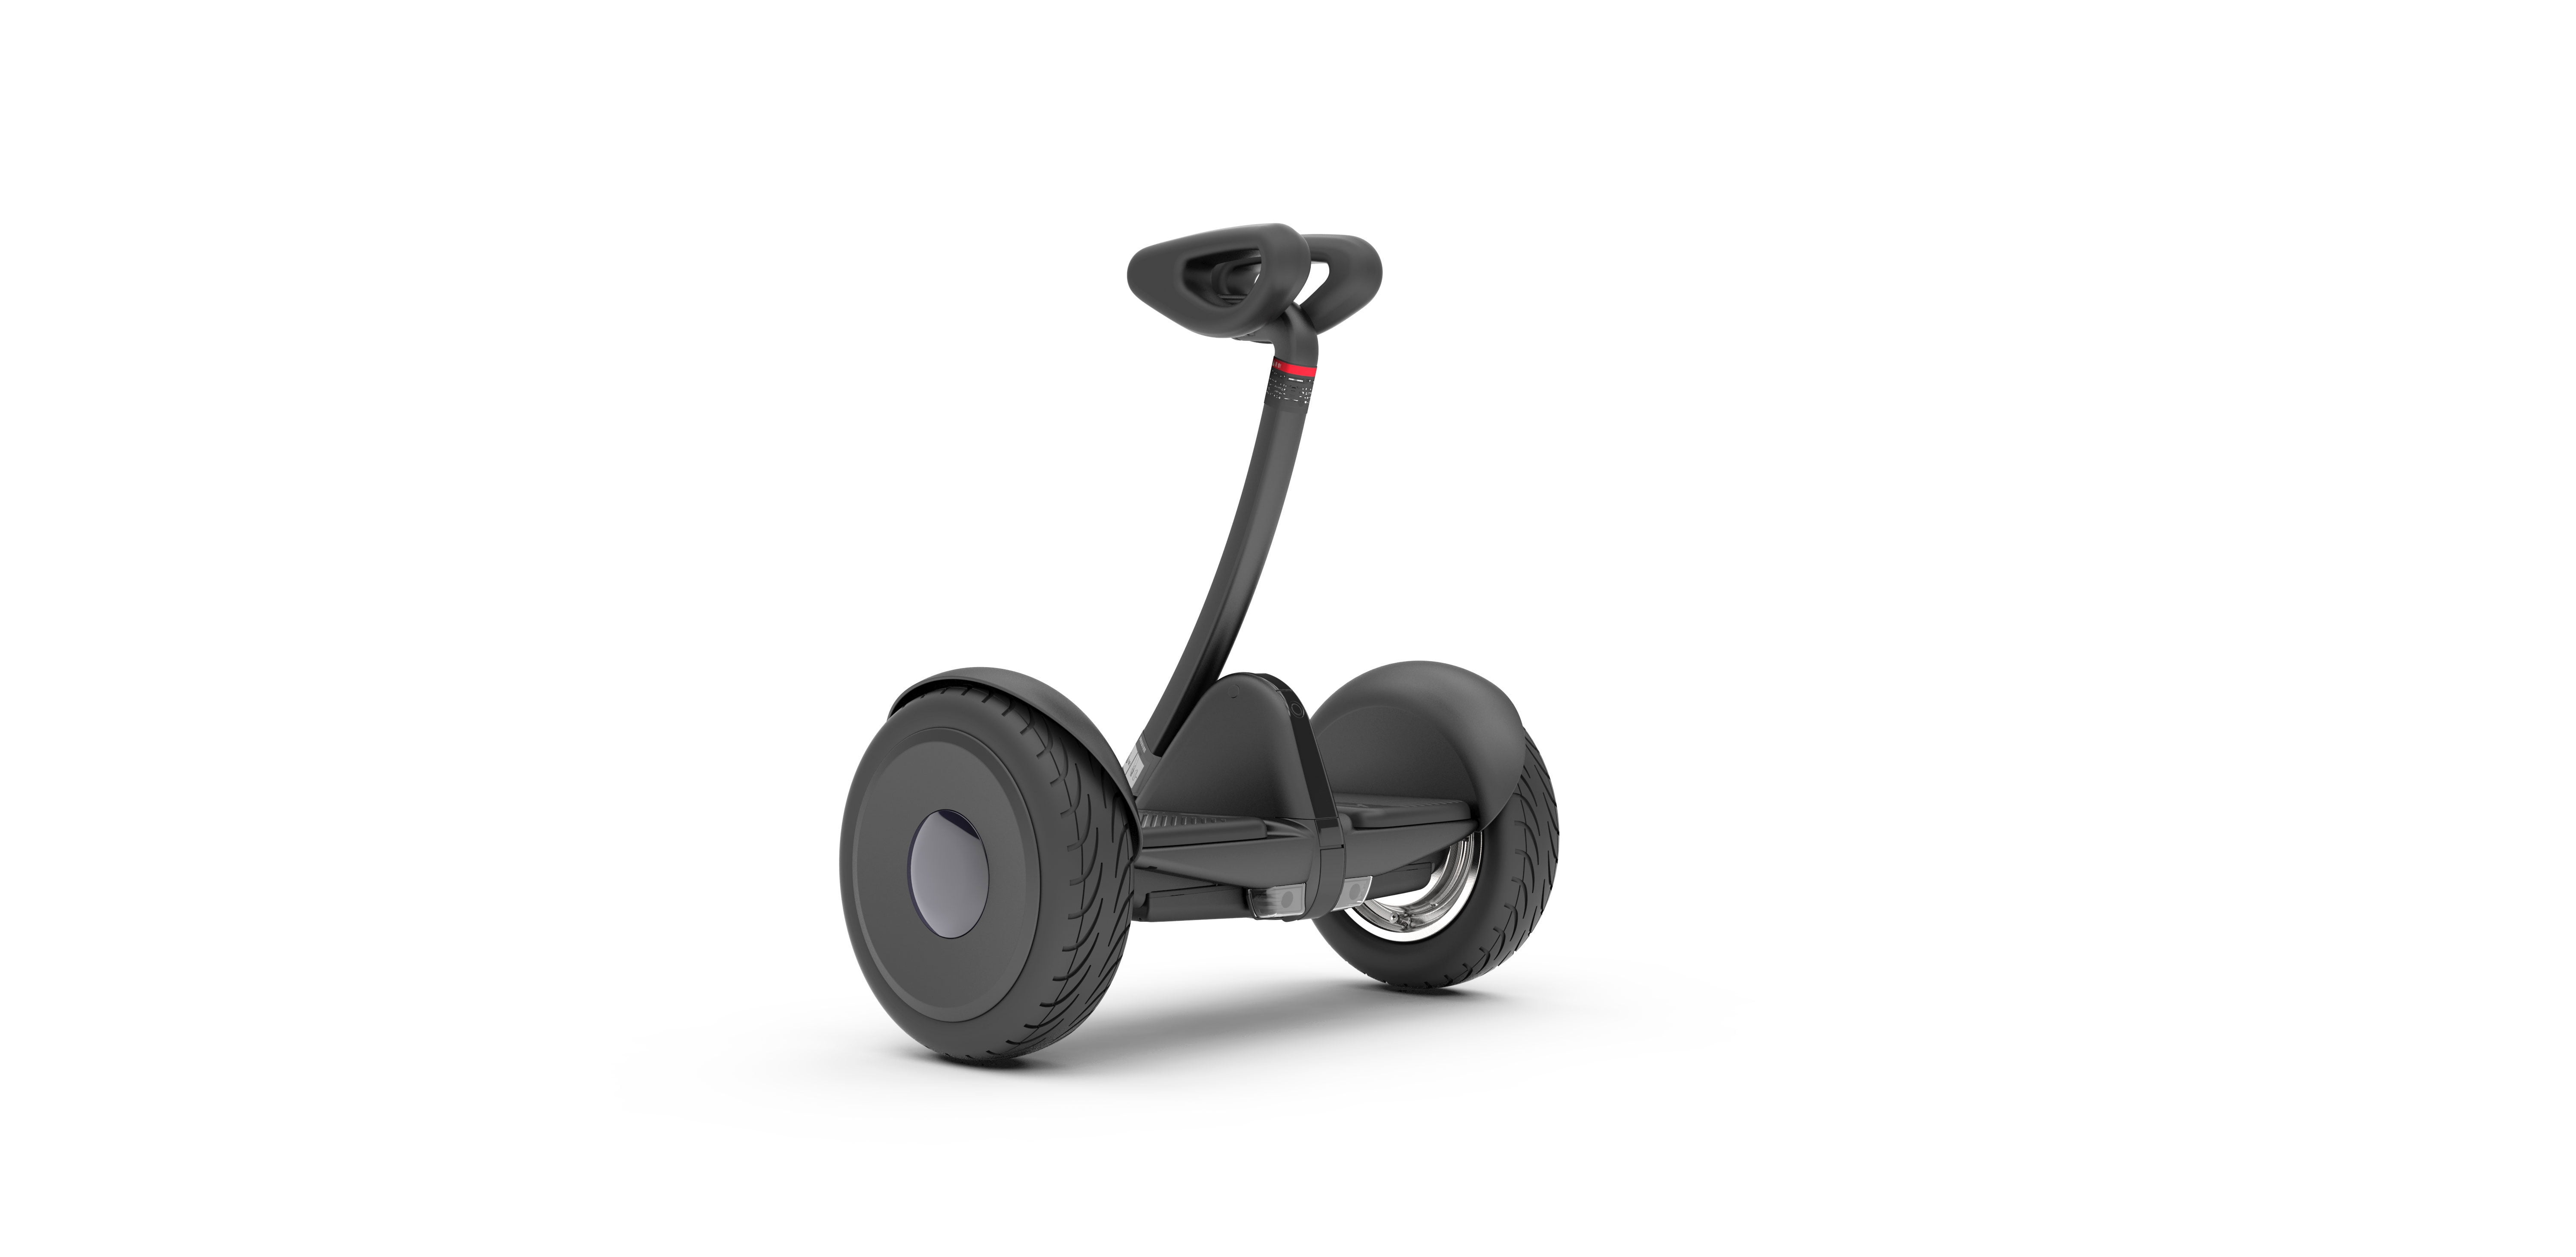 Segway Ninebot S Smart Electric Scooter with LED light, Portable and Powerful, - Walmart.com